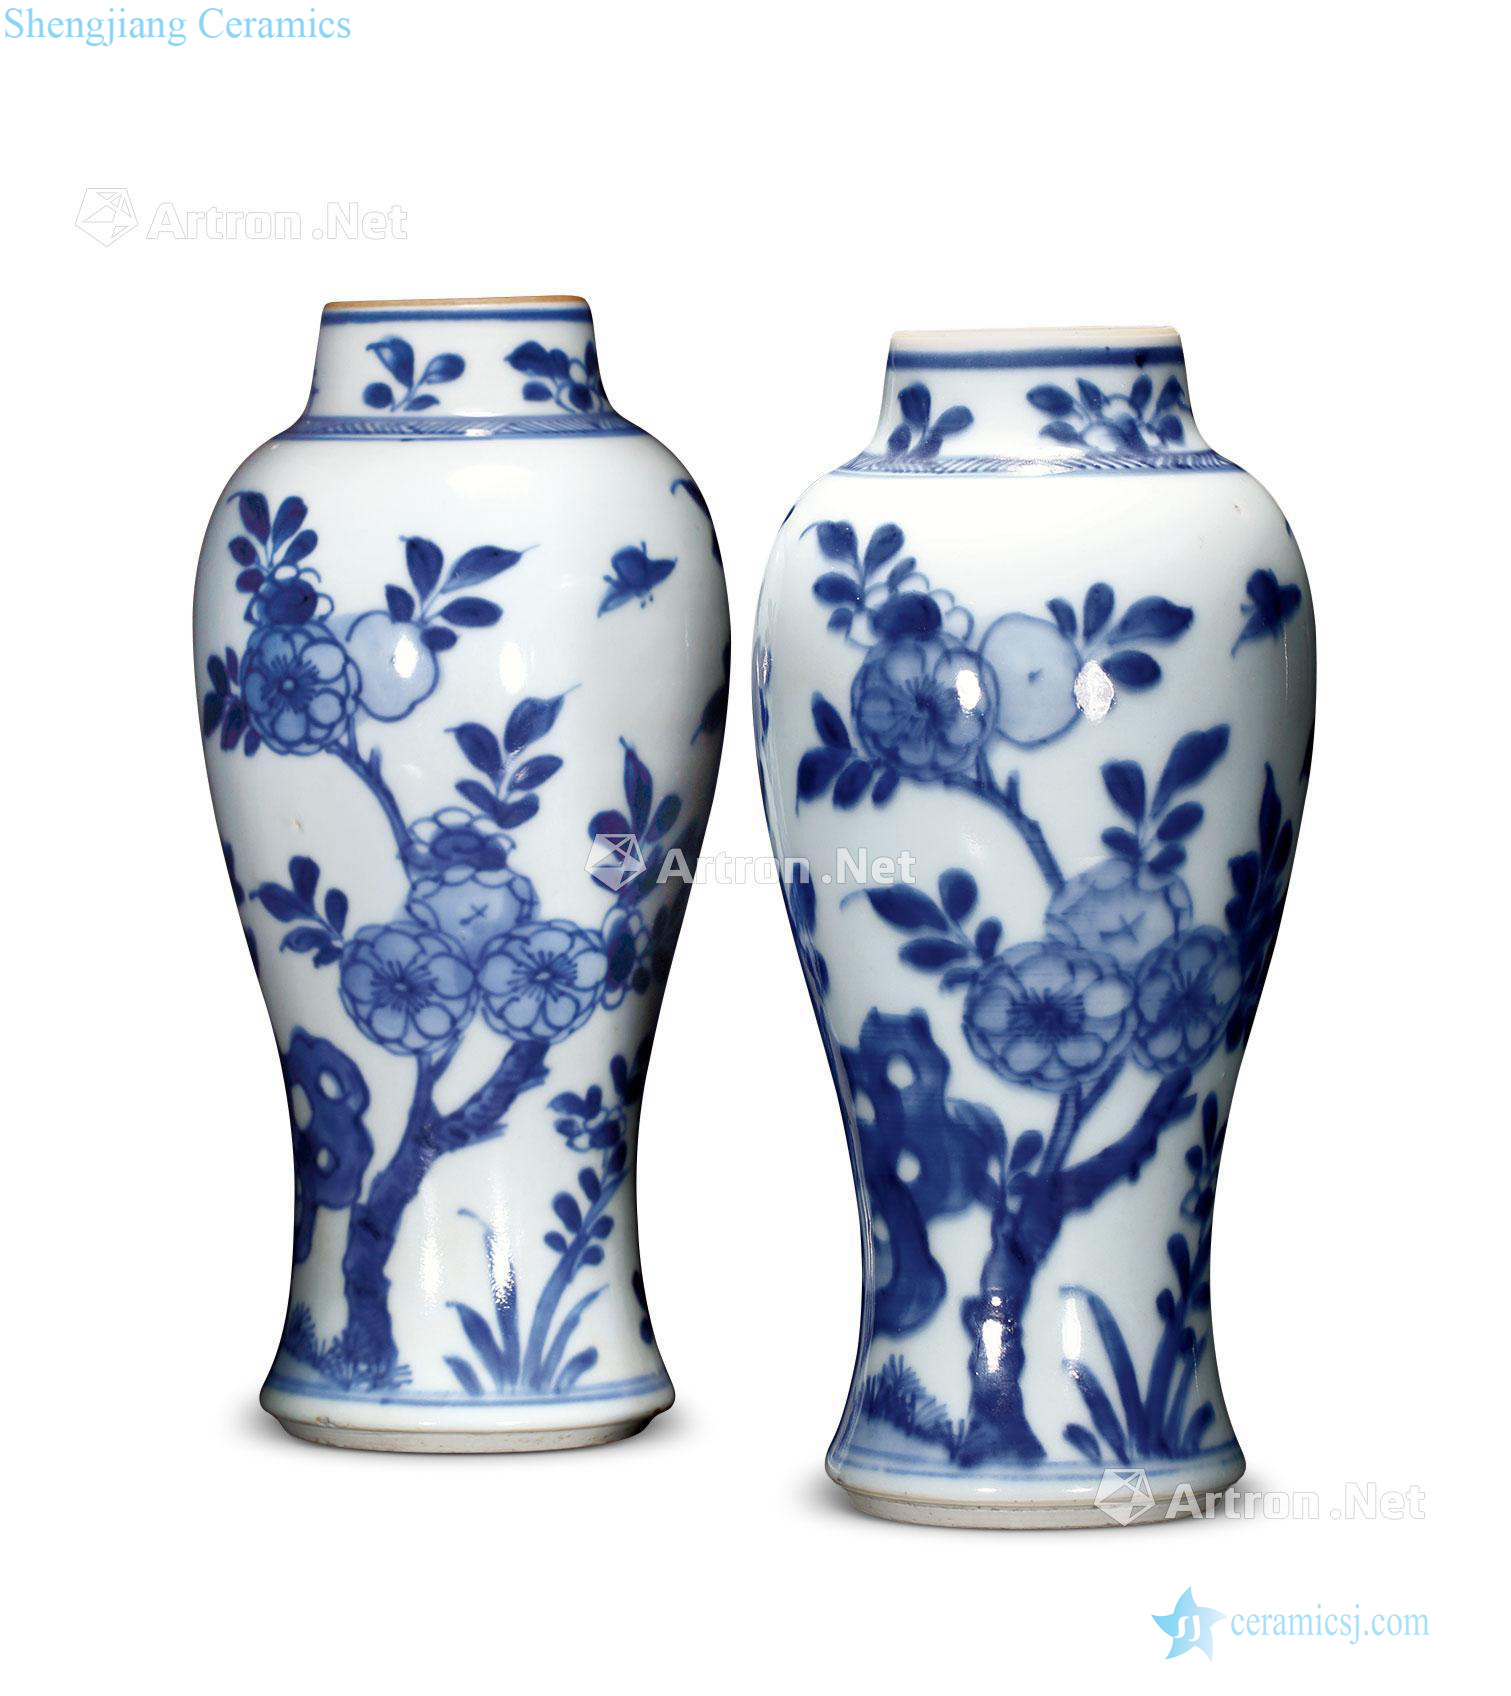 Qing dynasty blue and white plum bottle (a)